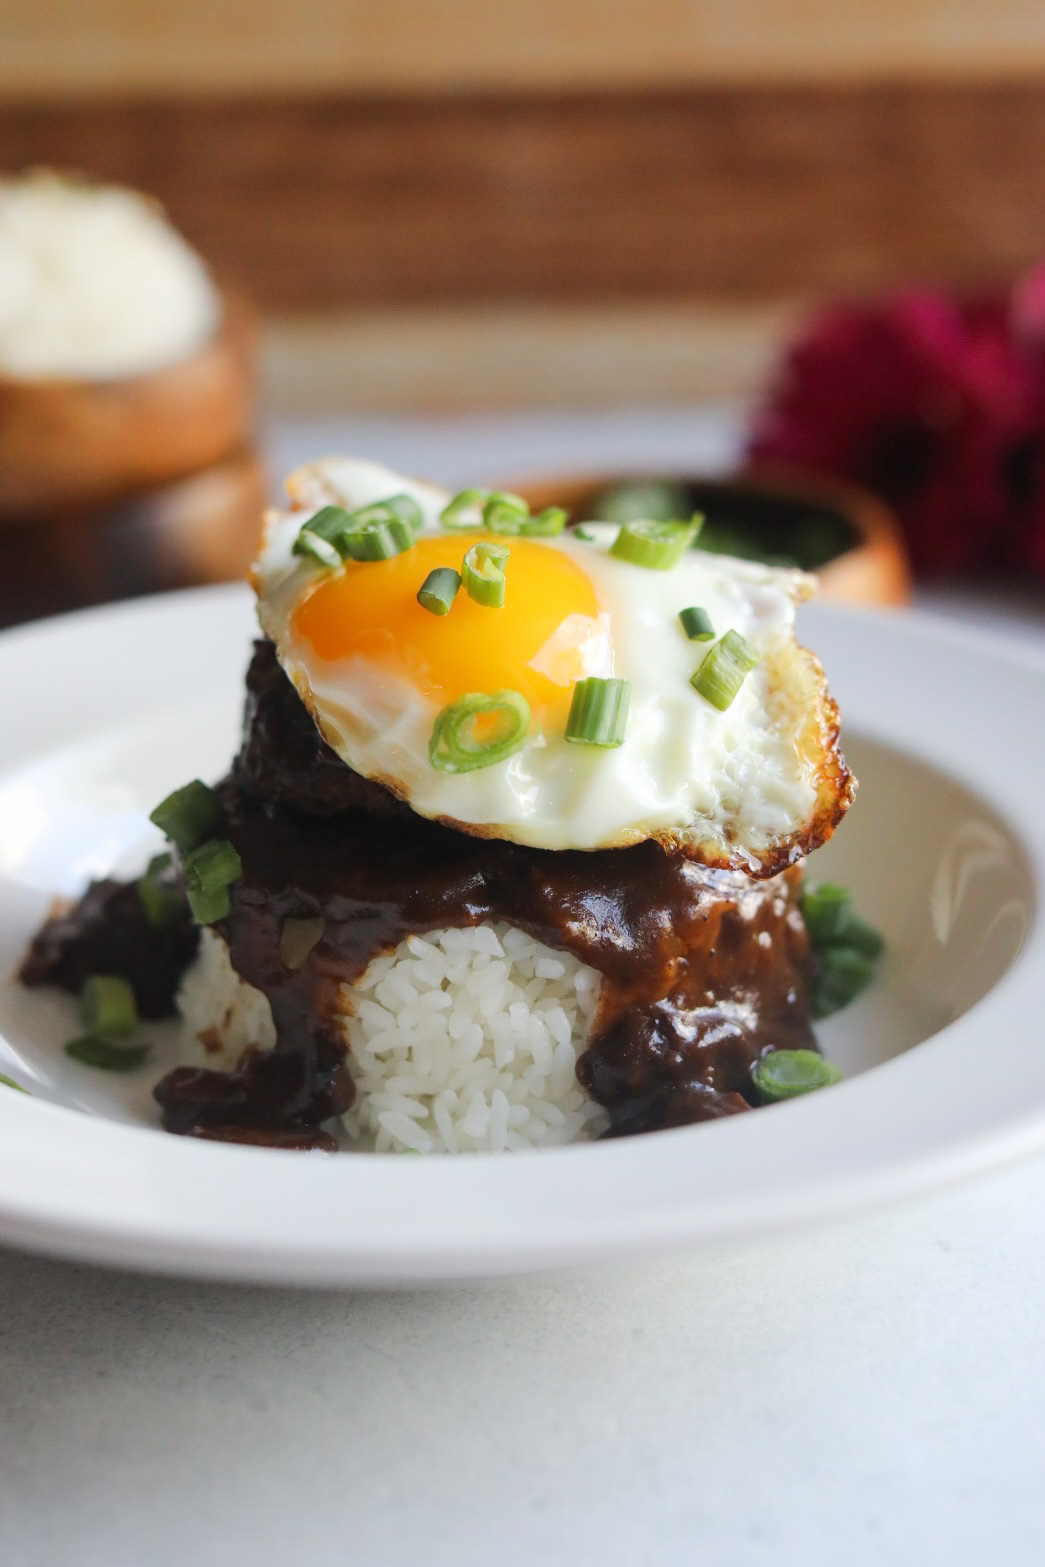 Loco Moco Recipe in a white shallow bowl. A mound of rice in an oval/circular shape is topped with brown gravy, hamburger patty and topped with a sunny side up egg. Dish is topped with chopped green onions and in the background out of focus are two wooden bowls stacked with extra white rice (on the left) and on the right images of dark pink flowers.